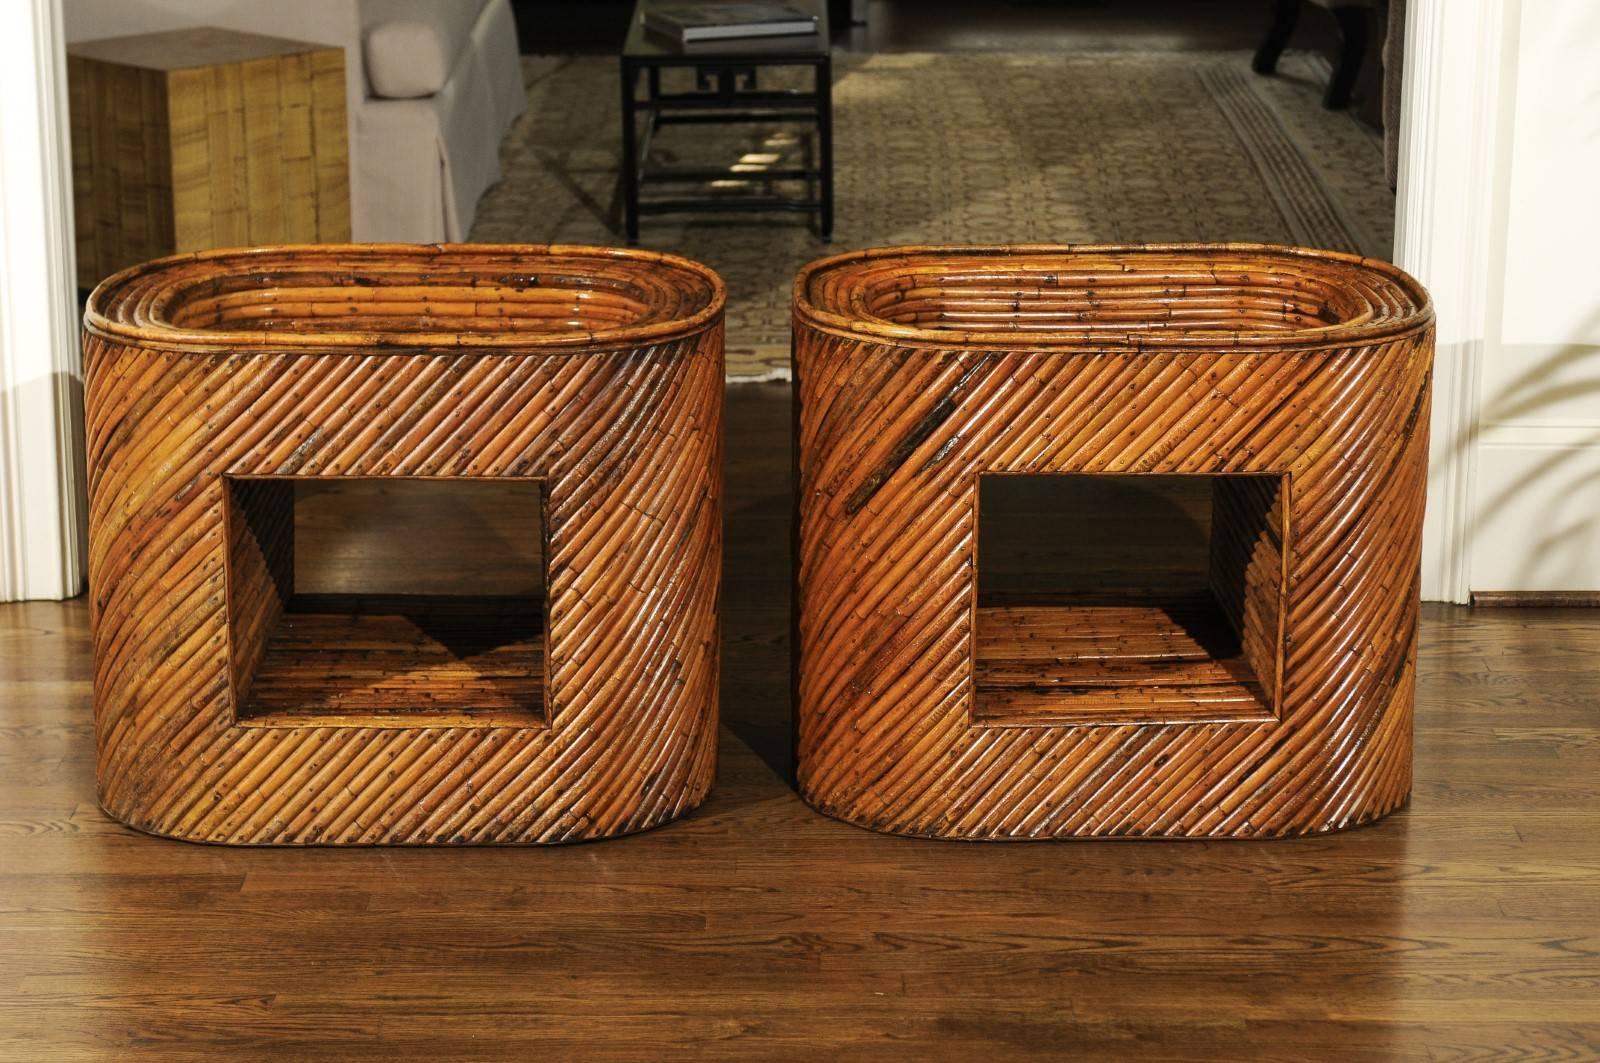 Exceptional Restored Pair of Bamboo Display End Tables, circa 1975 For Sale 9